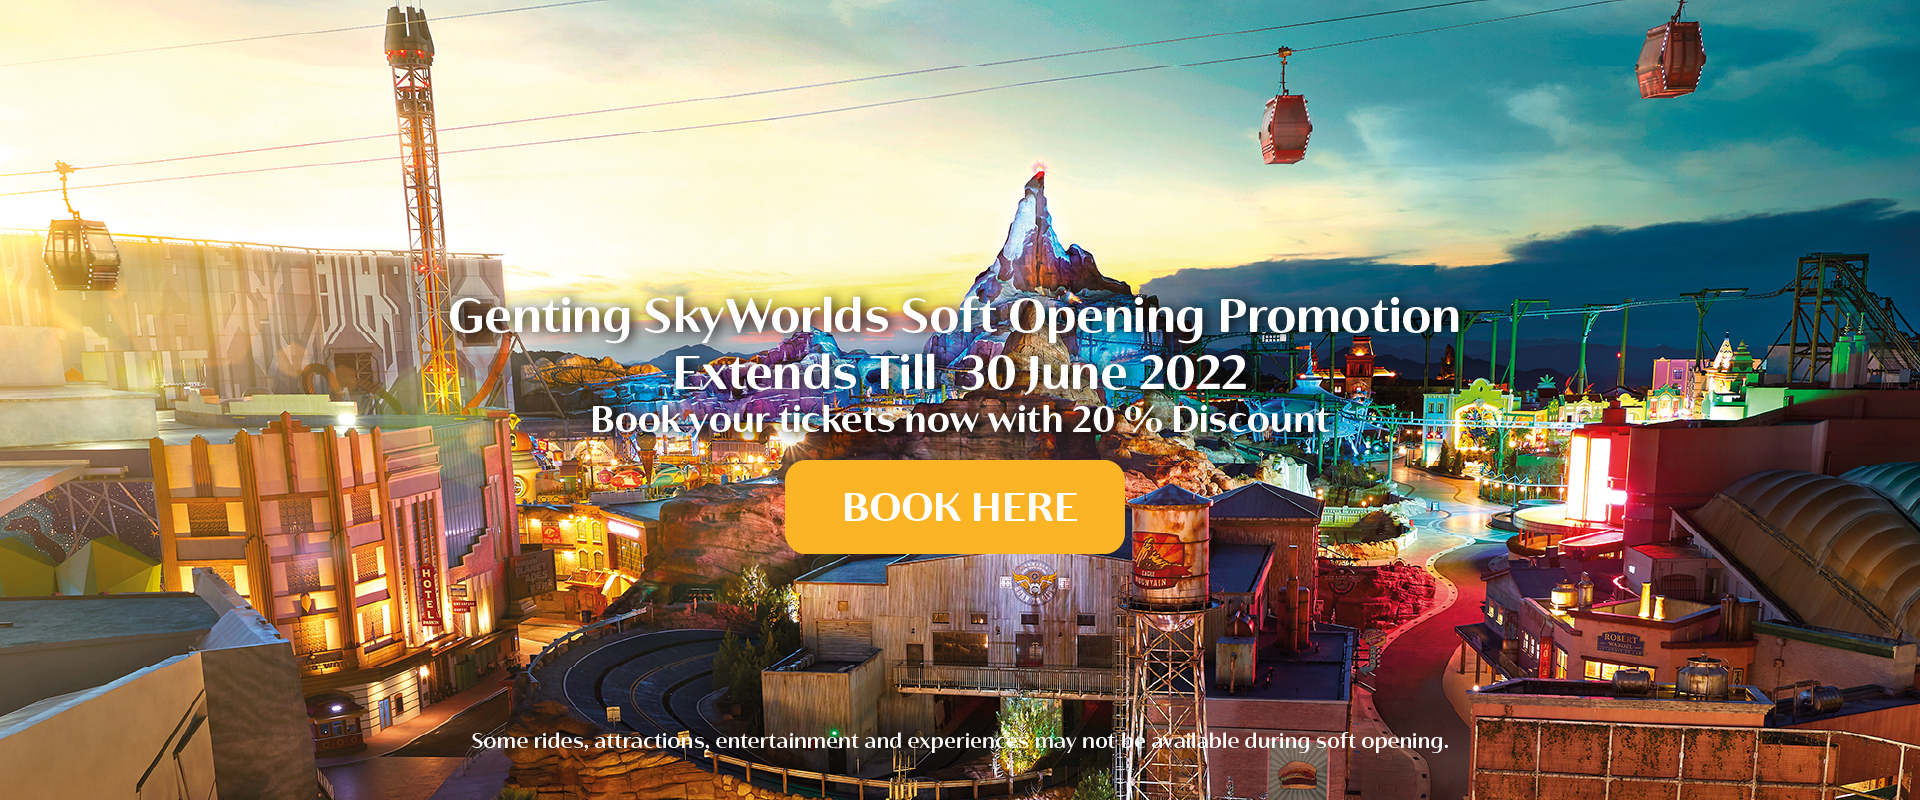 Theme genting 2021 price skyworld ticket park THINGS YOU